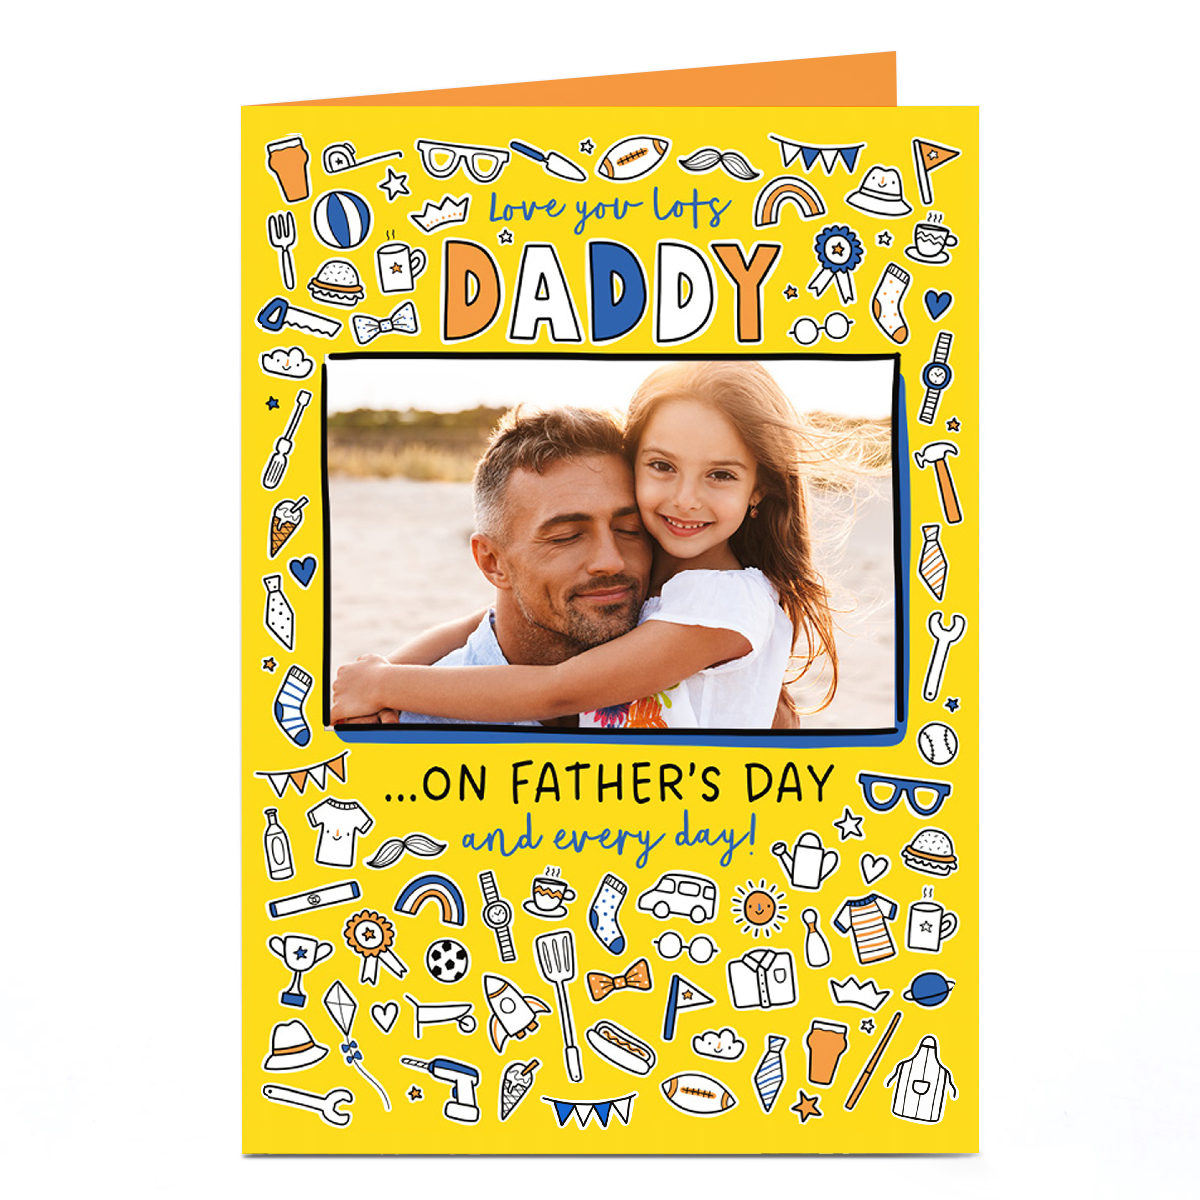 Personalised Father's Day Card Photo Card - Love you lots Daddy